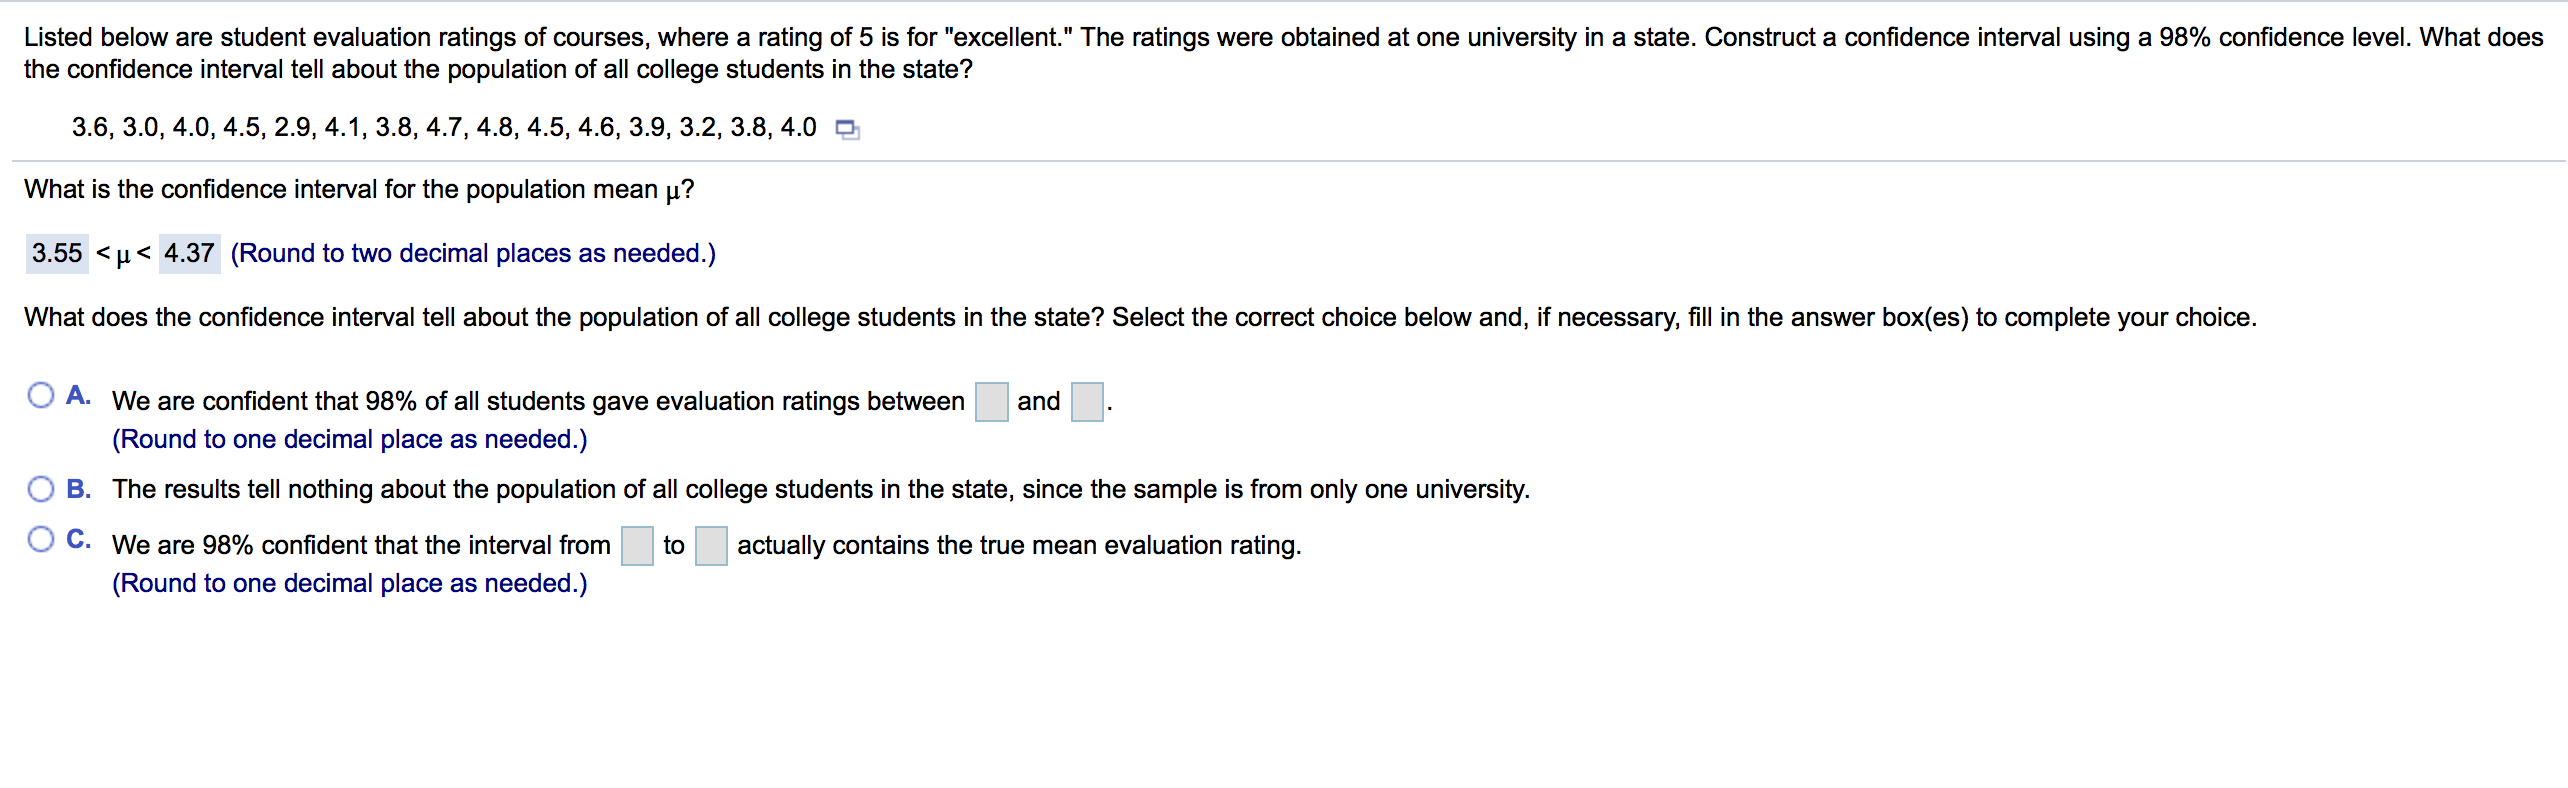 Listed below are student evaluation ratings of courses, where a rating of 5 is for "excellent." The ratings were obtained at one university in a state. Construct a confidence interval using a 98% confidence level. What does
the confidence interval tell about the population of all college students in the state?
3.6, 3.0, 4.0, 4.5, 2.9, 4.1, 3.8, 4.7, 4.8, 4.5, 4.6, 3.9, 3.2, 3.8, 4.0 O
What is the confidence interval for the population mean µ?
3.55 <µ< 4.37 (Round to two decimal places as needed.)
What does the confidence interval tell about the population of all college students in the state? Select the correct choice below and, if necessary, fill in the answer box(es) to complete your choice.
O A. We are confident that 98% of all students gave evaluation ratings between
and
(Round to one decimal place as needed.)
B. The results tell nothing about the population of all college students in the state, since the sample is from only one university.
C. We are 98% confident that the interval from
to
actually contains the true mean evaluation rating.
(Round to one decimal place as needed.)
